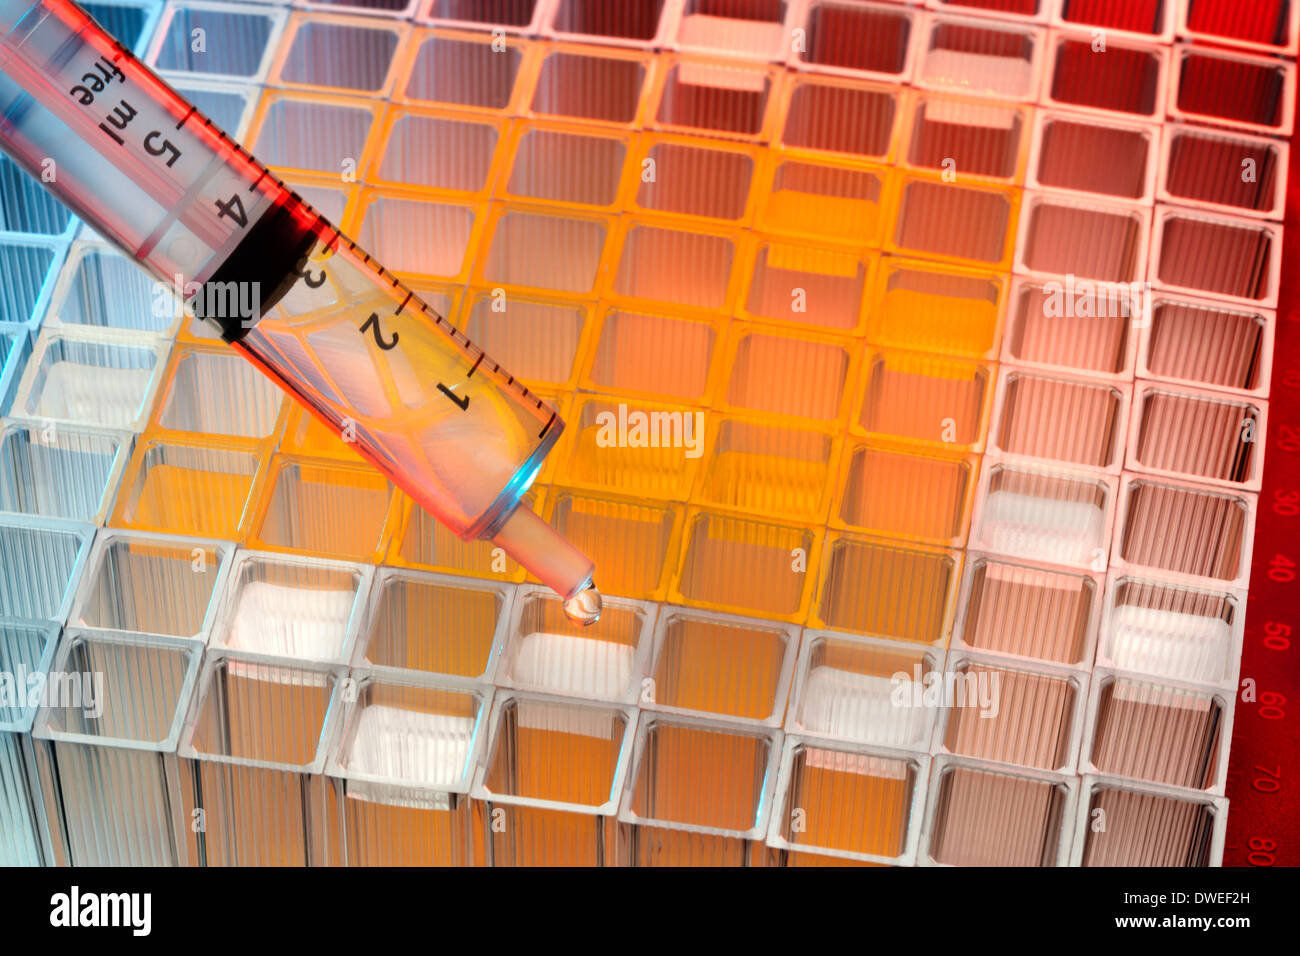 Testing of Microbiological samples in a hospital Pathology Laboratory. Stock Photo